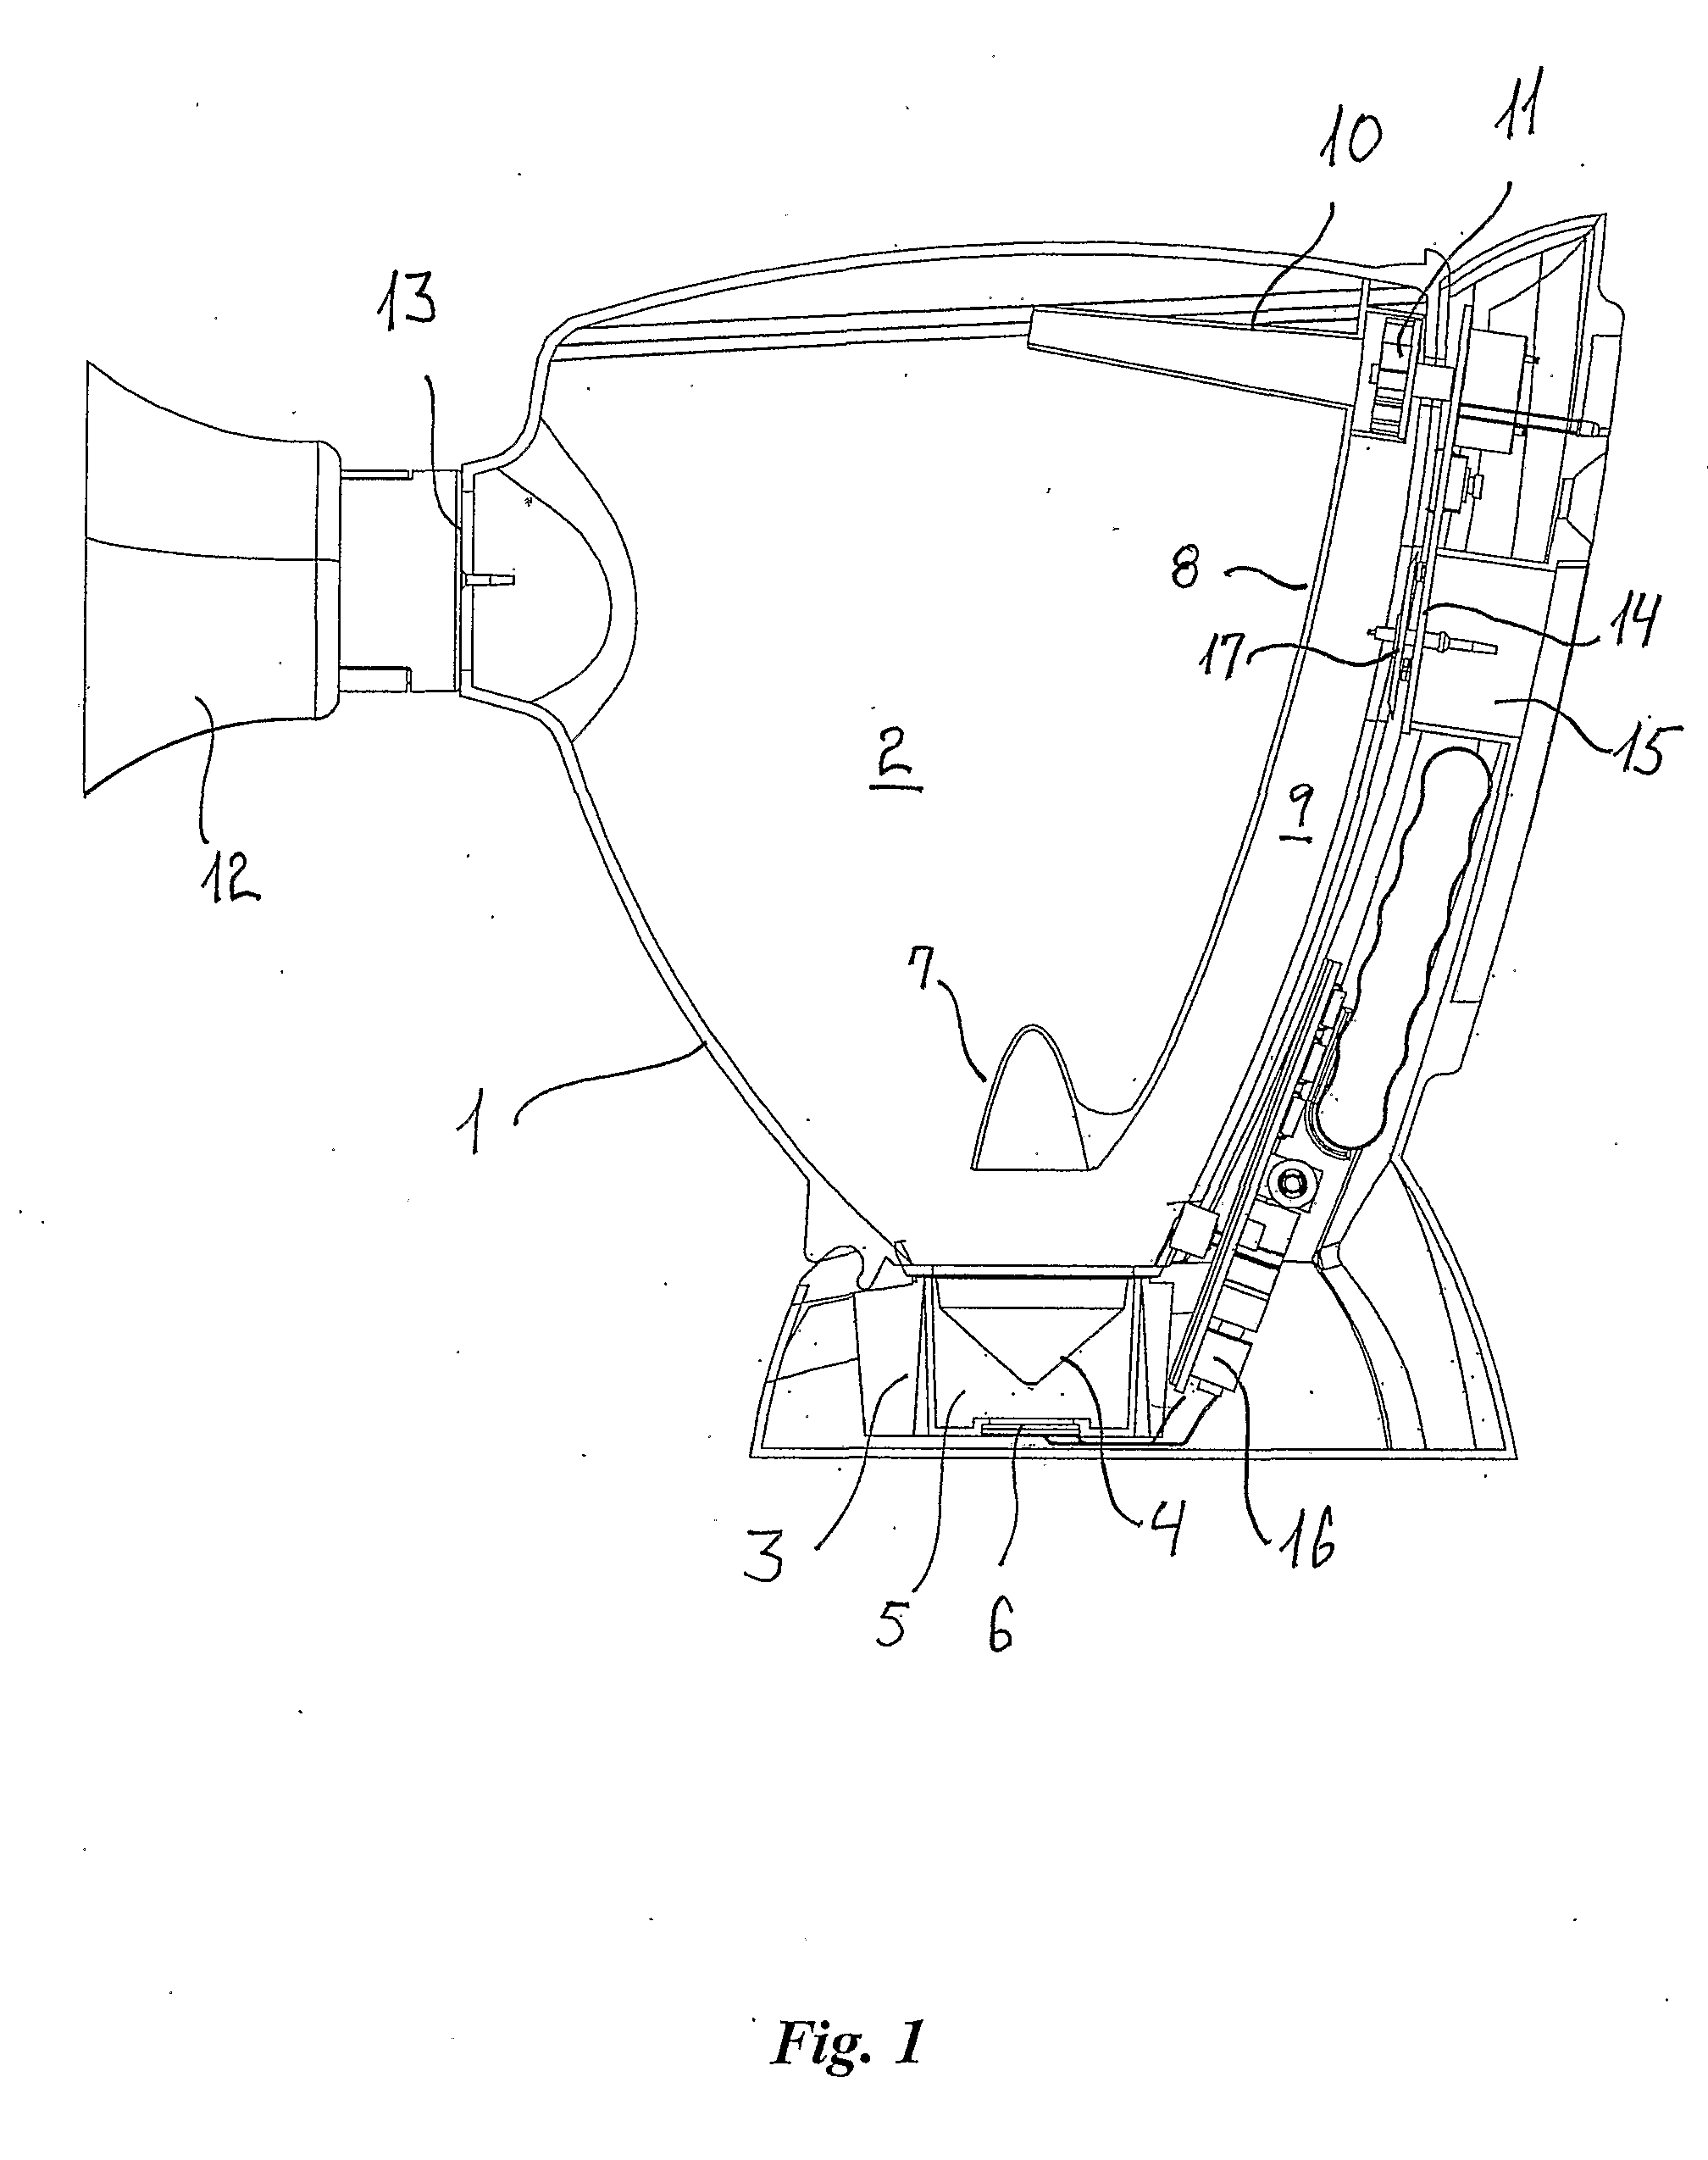 Inhalation device for providing a mist of nebulised liquid medical solution to a user